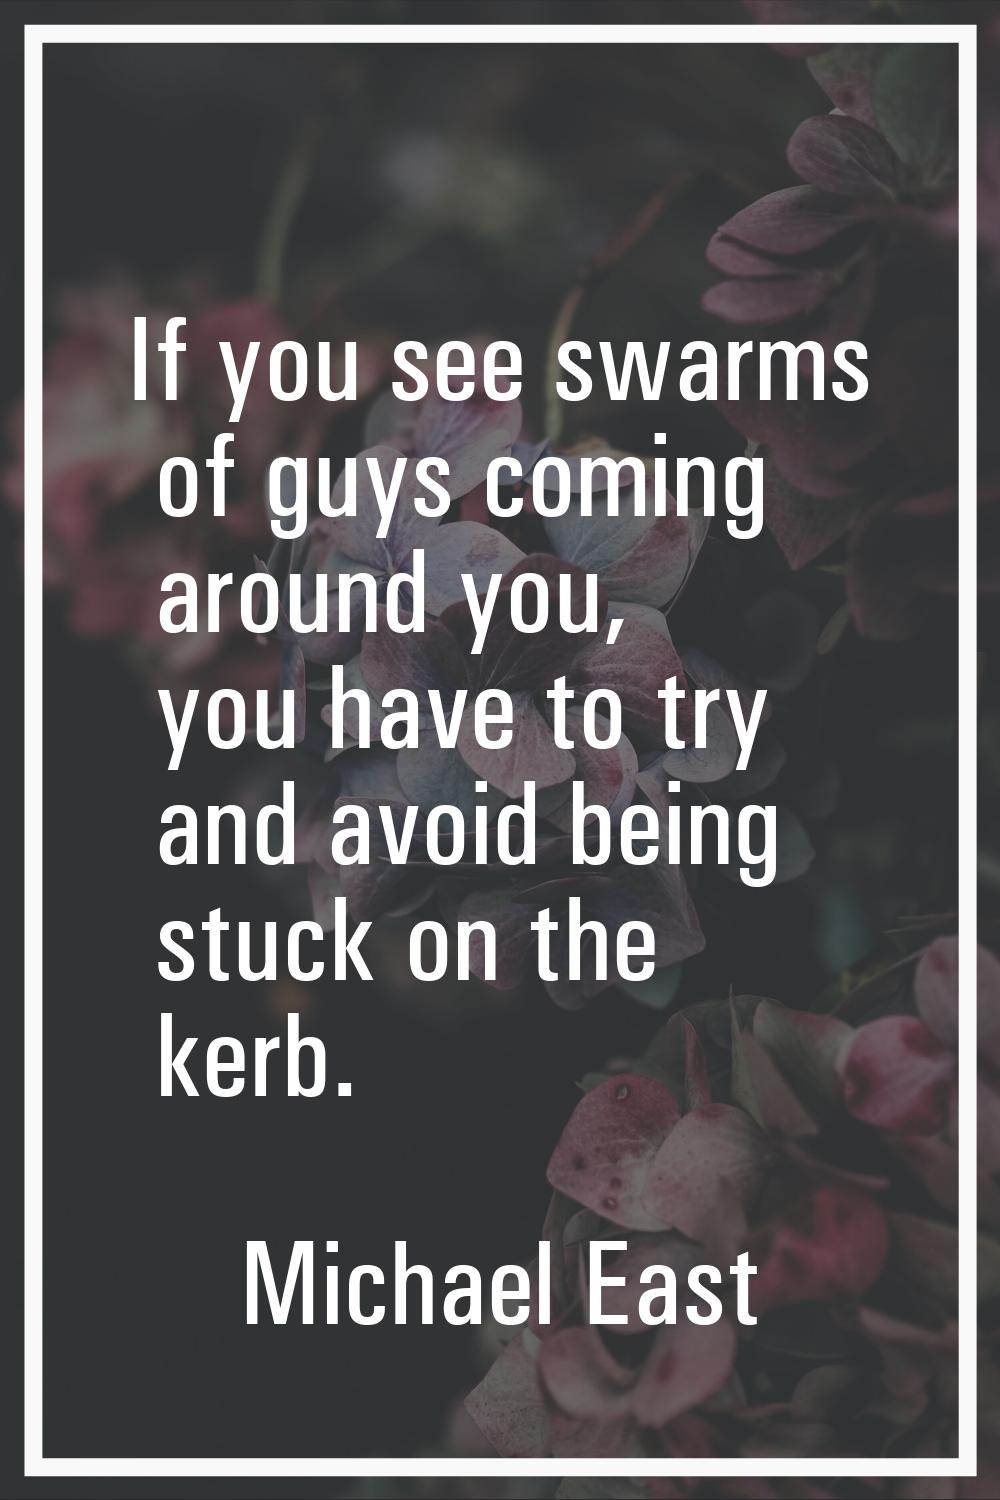 If you see swarms of guys coming around you, you have to try and avoid being stuck on the kerb.